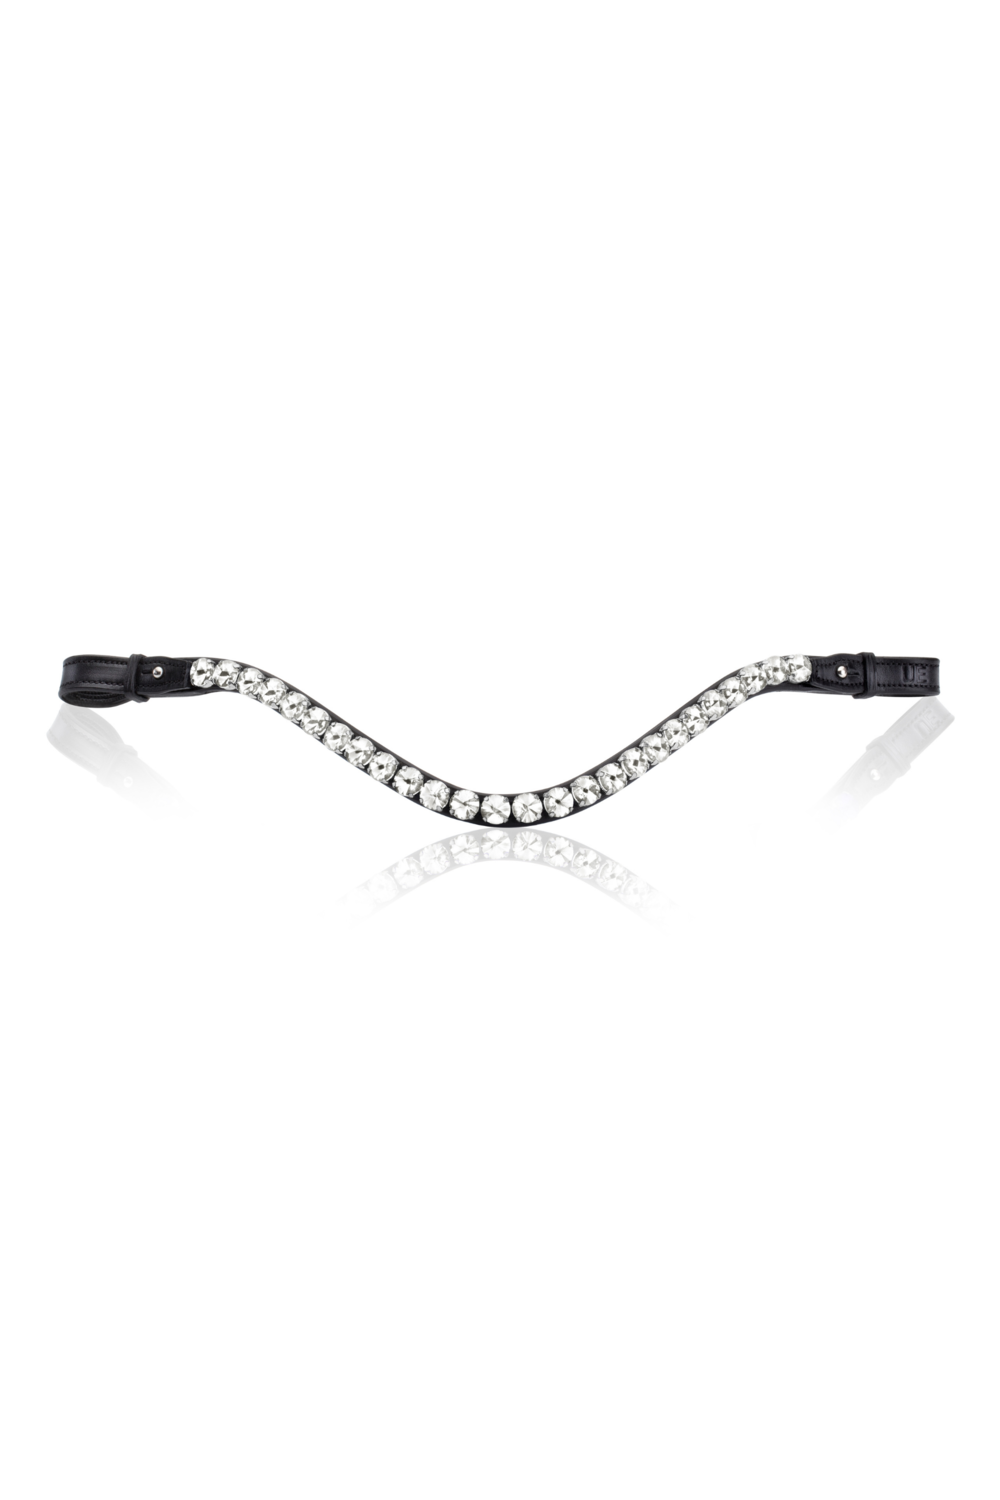 Utzon Equestrian Empire Browband Clear